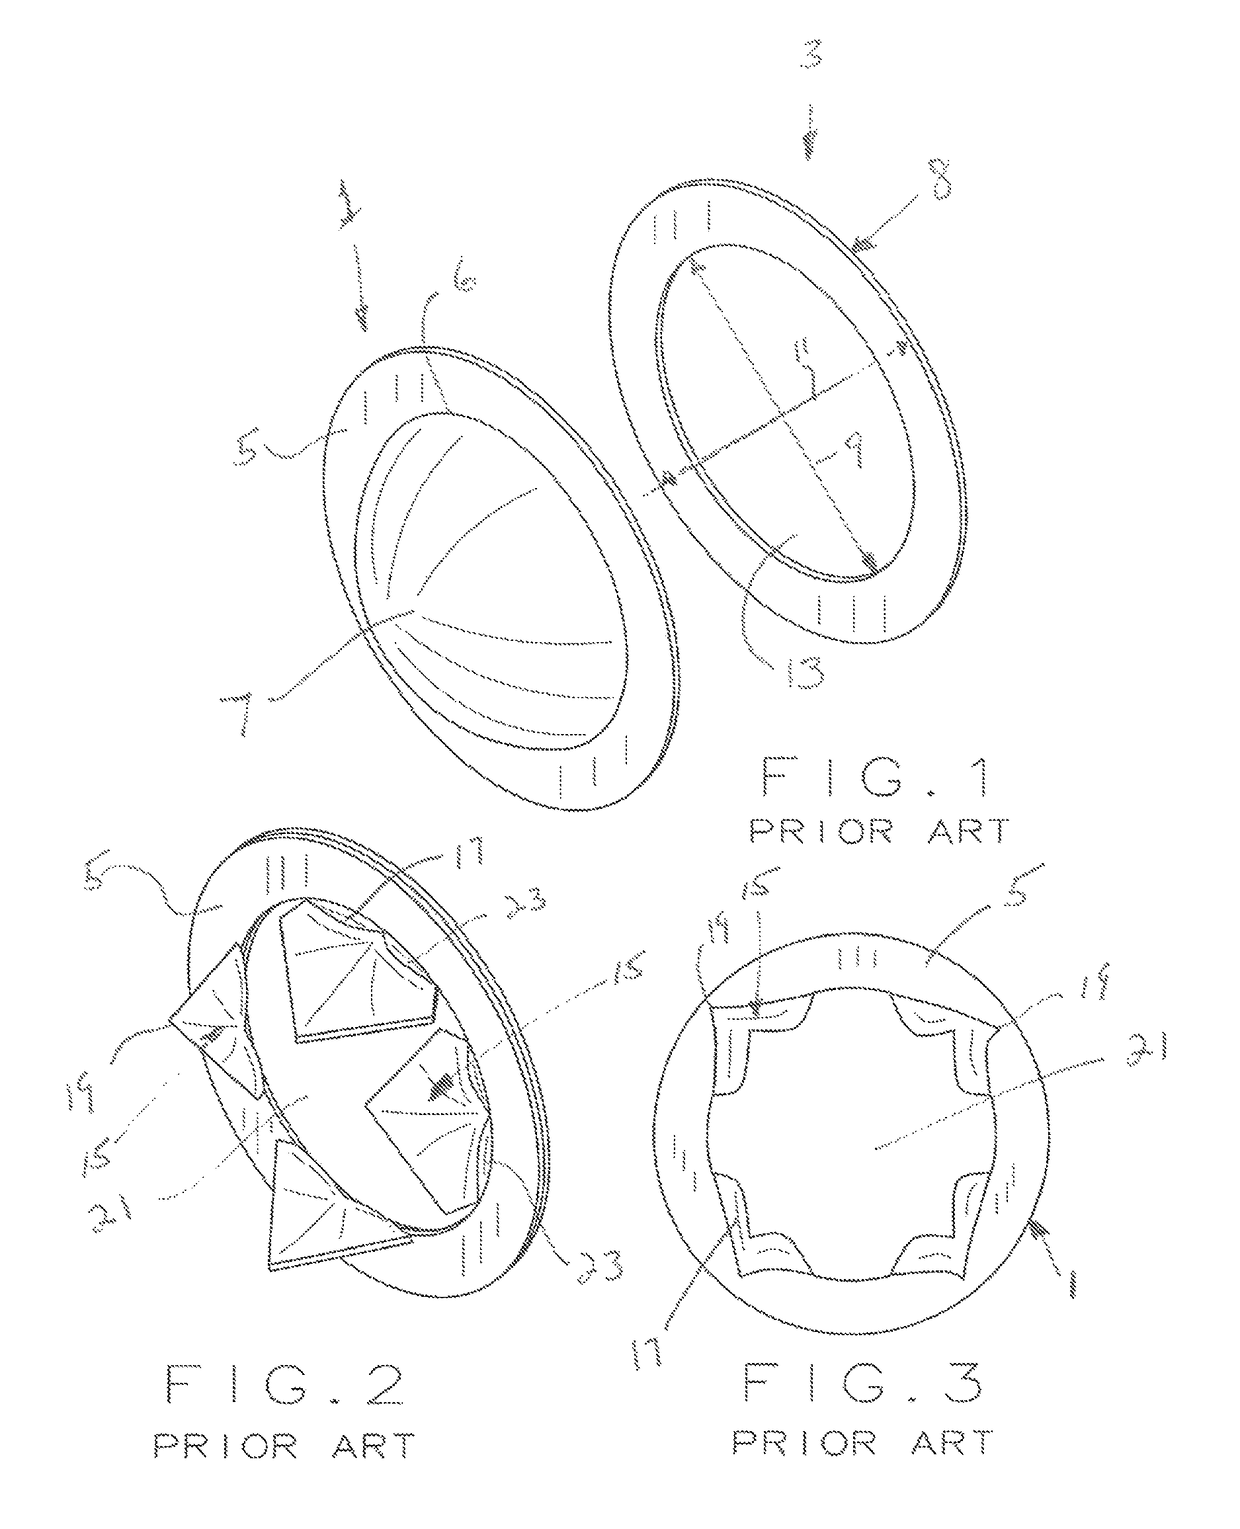 Inlet support structure for a tension acting rupture disc